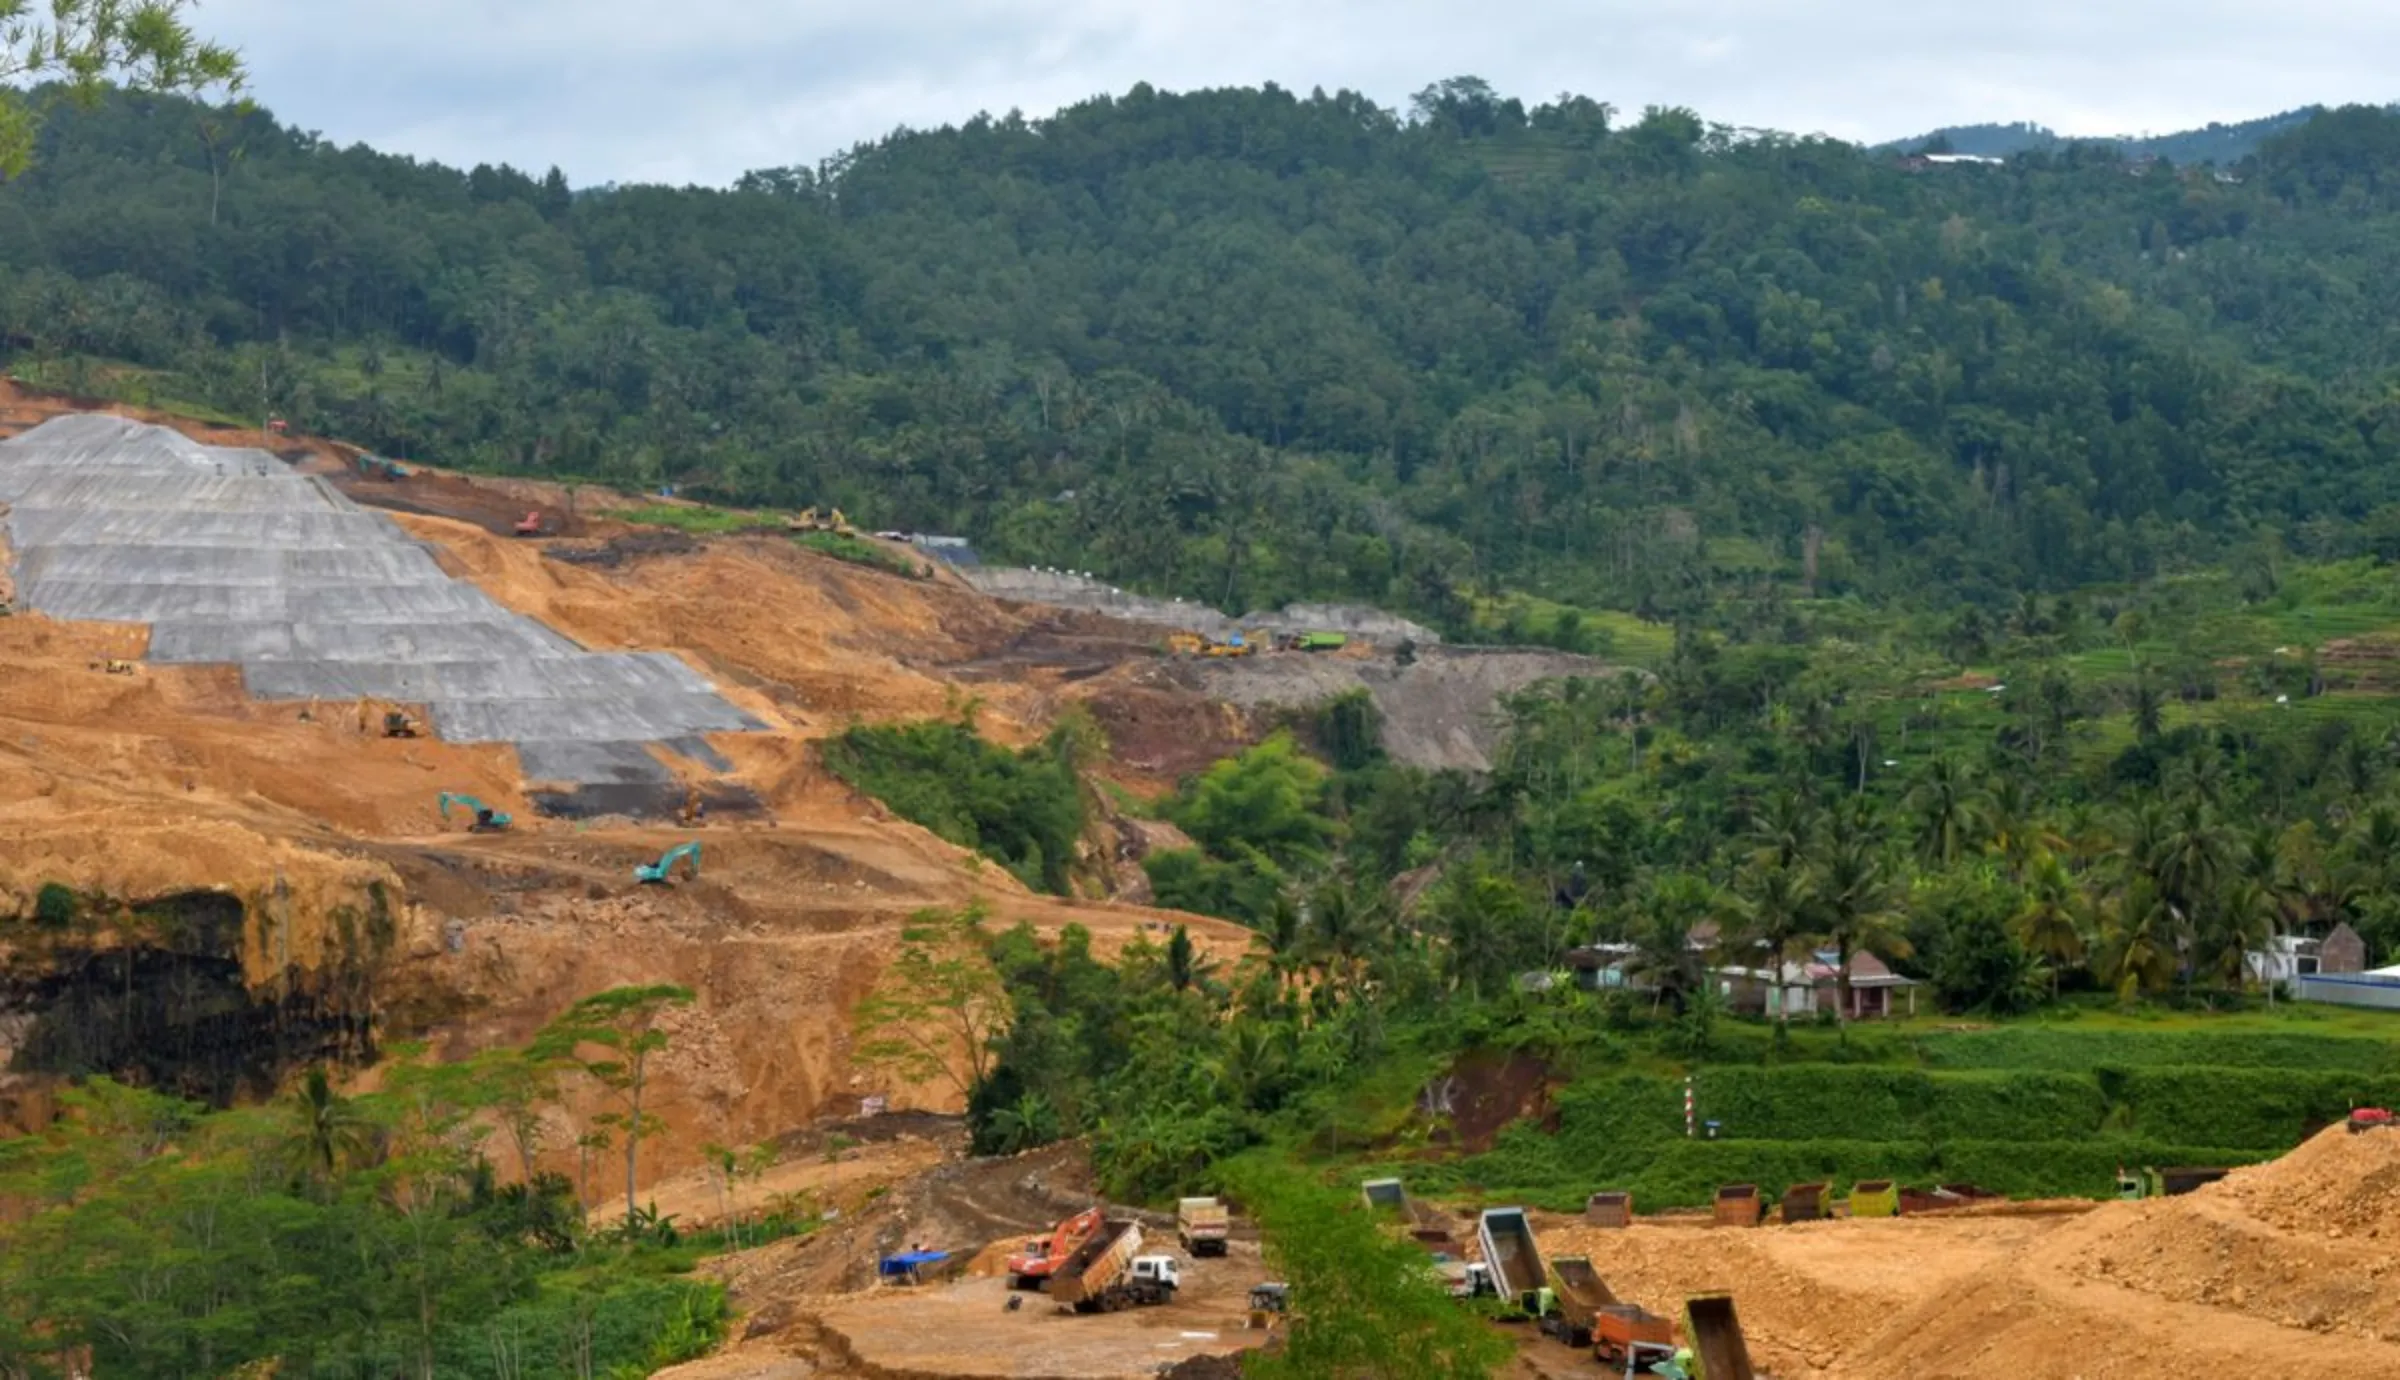 The Bagong Dam project which destroyed hundreds of hectares of forest in Trenggalek Regency, Indonesia, December 20, 2022. Thomson Reuters Foundation/Asad Asnawi.